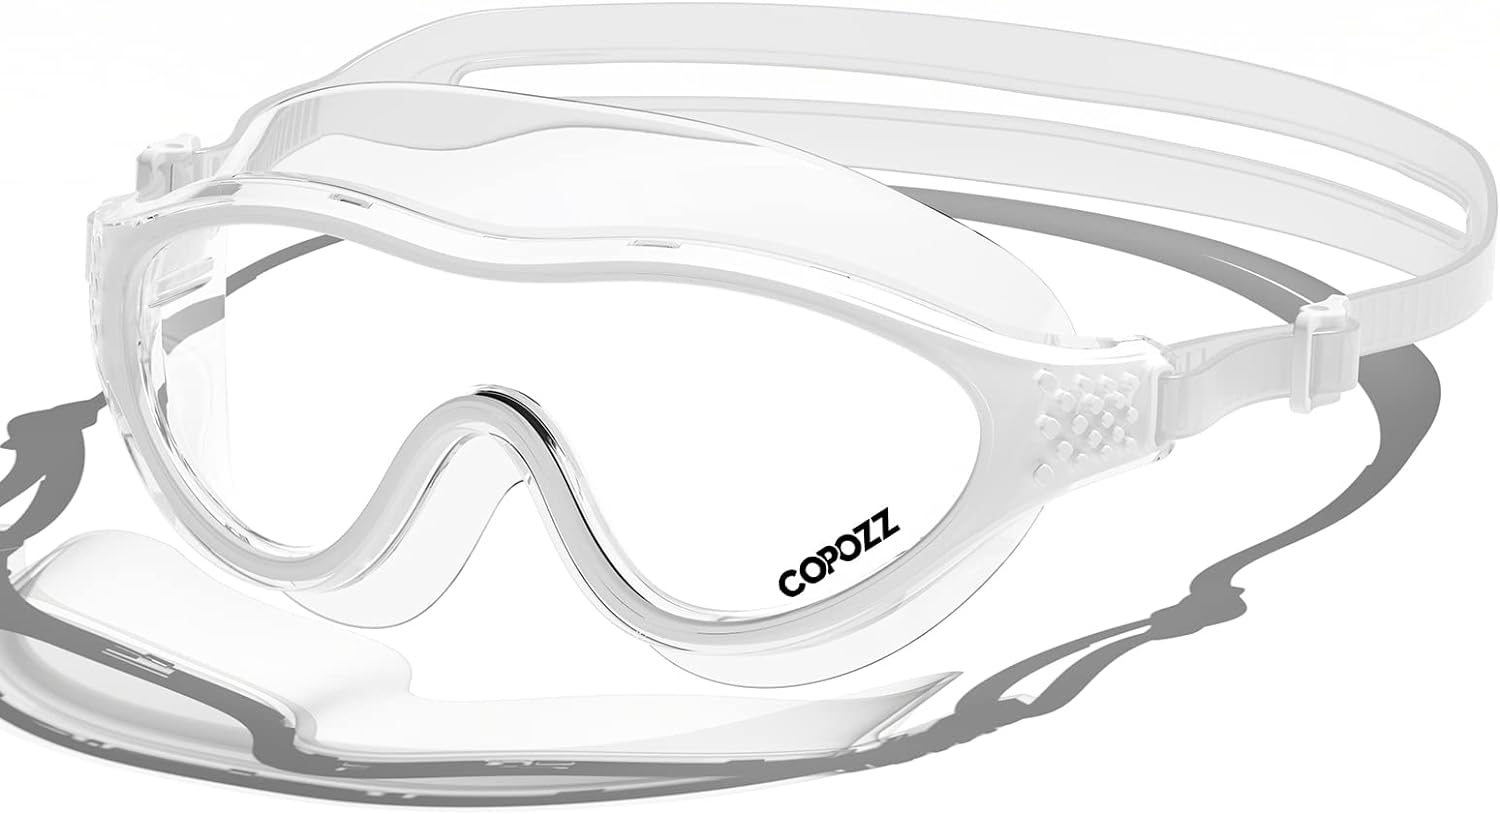 COPOZZ Wide View Swim Goggles, Comfy Swimming Goggles for Adult Men Women Youth, Anti-fog No Leaking UV Protection